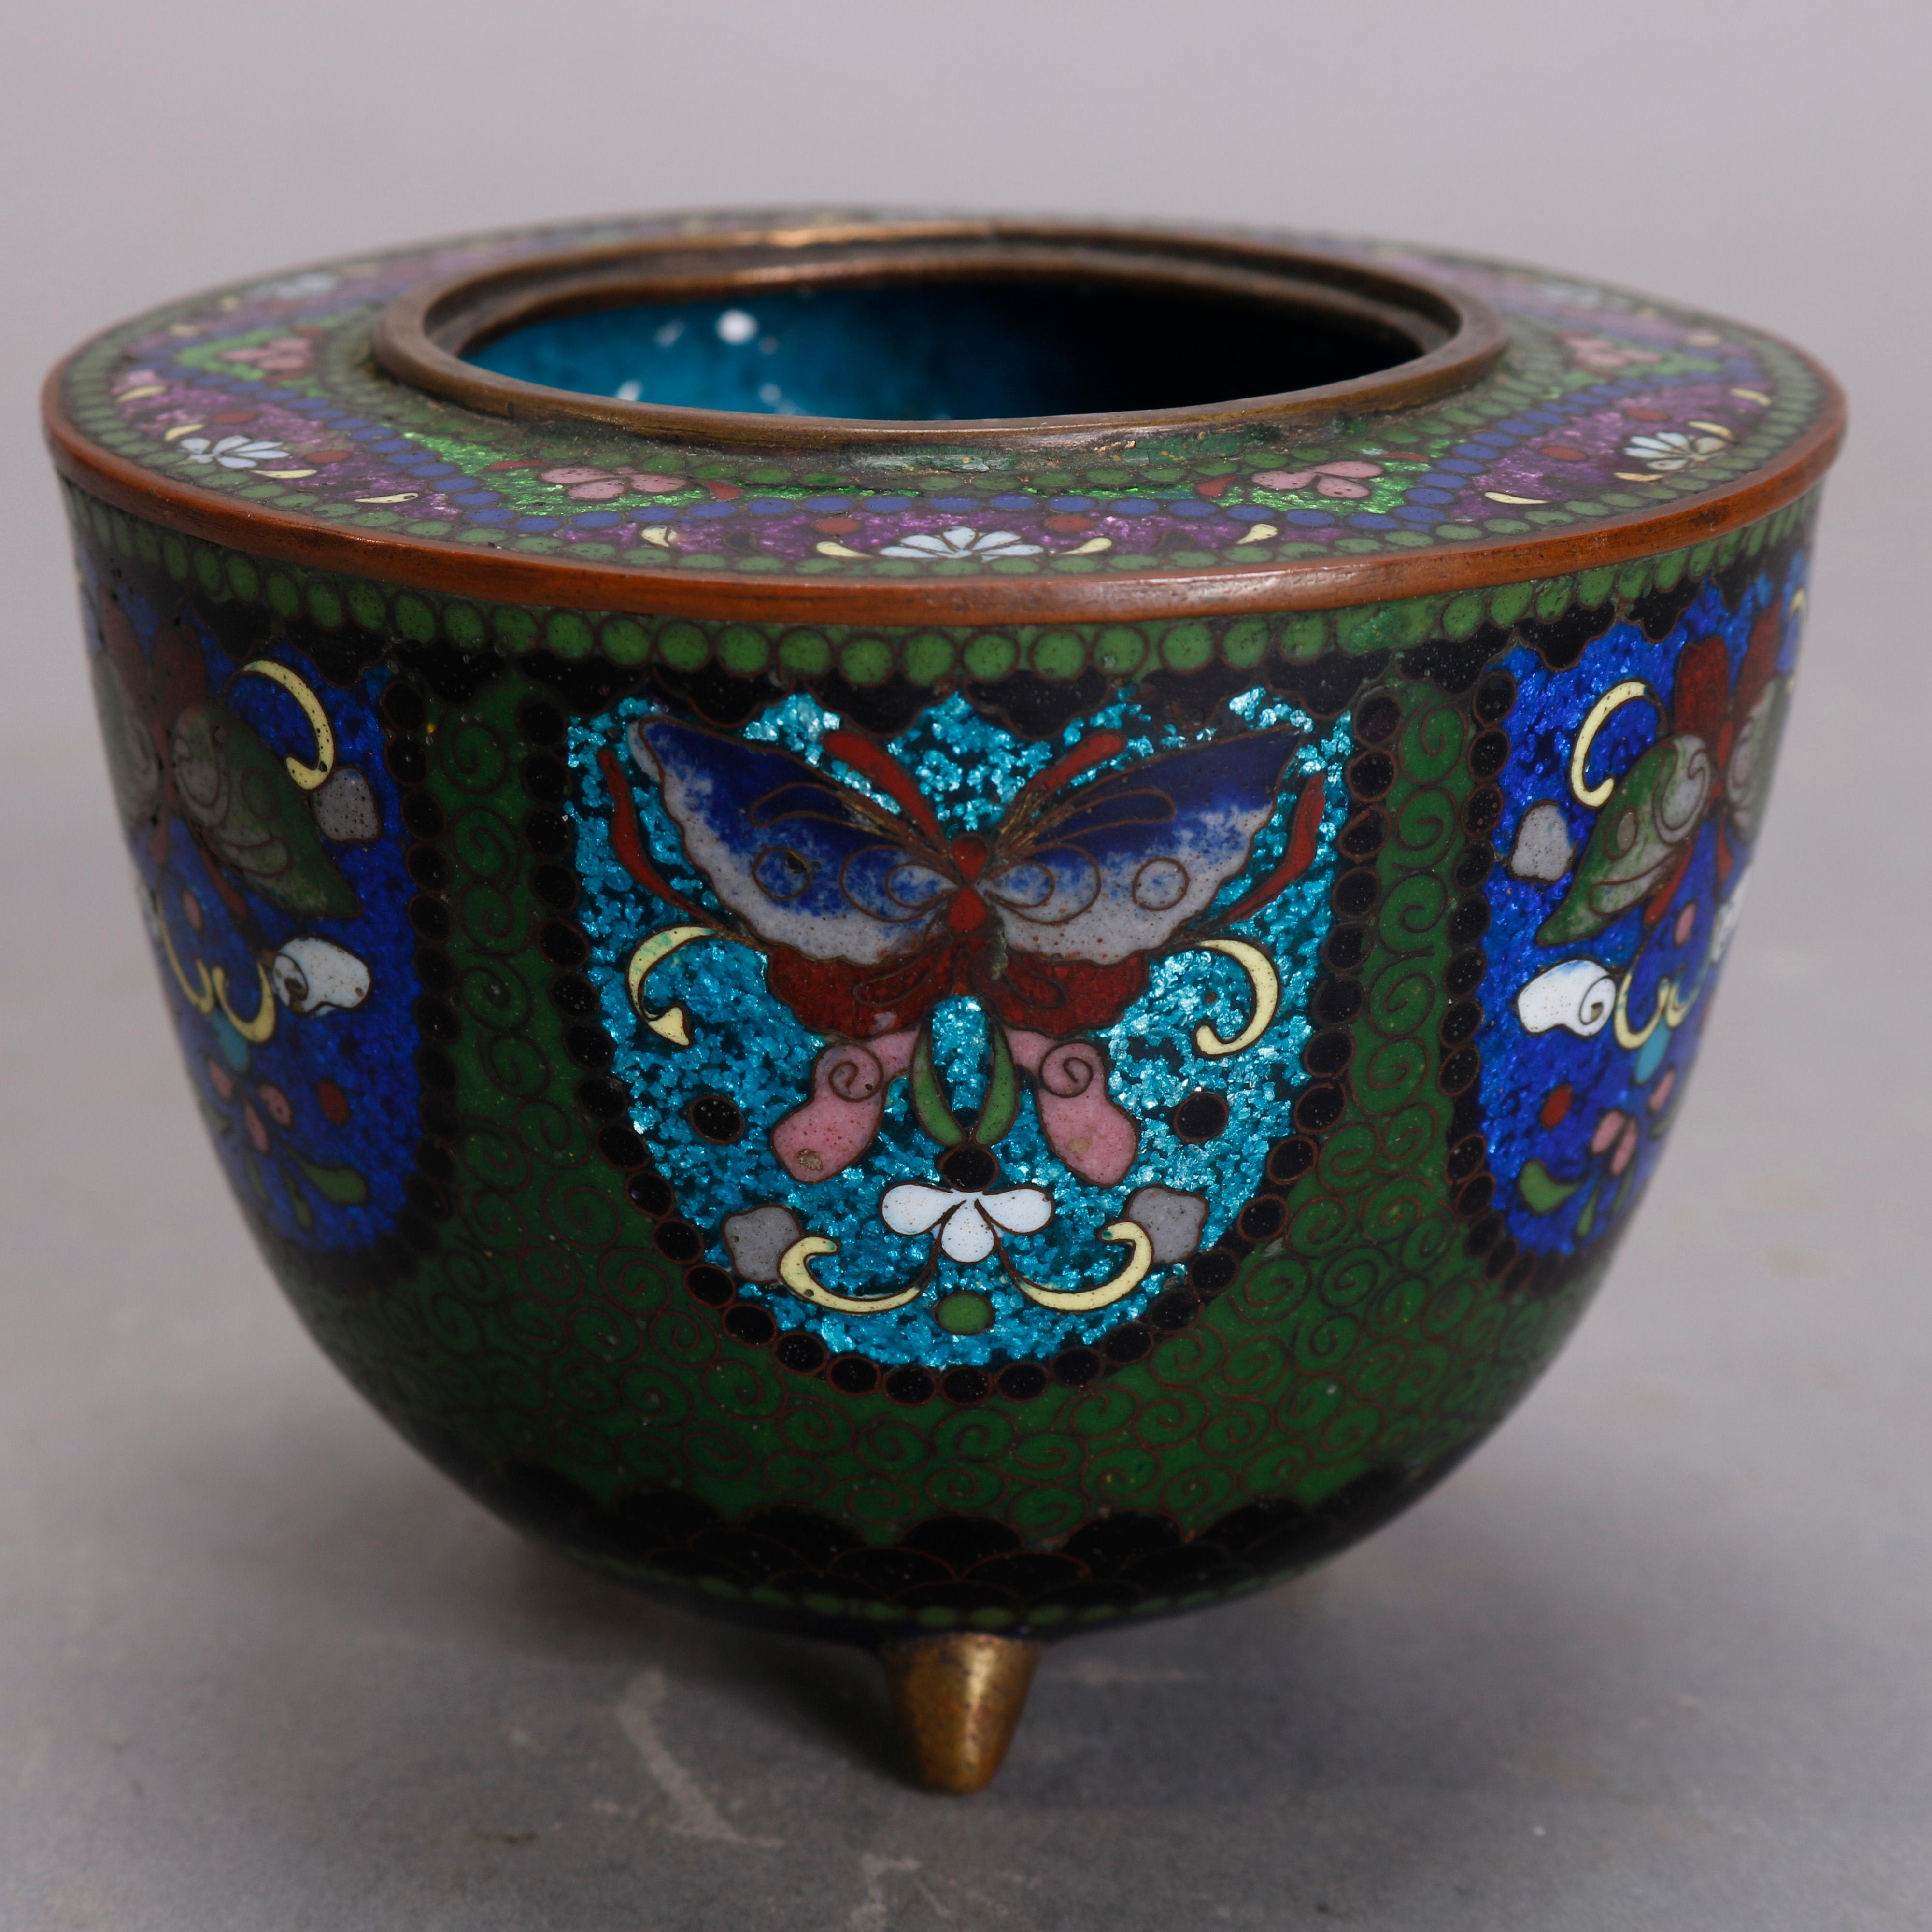 An antique Chinese Cloisonne lidded server offers enameled design with repeating butterfly reserves and floral collar, raised on three cone form feet, circa 1900.

Measures - 3.5